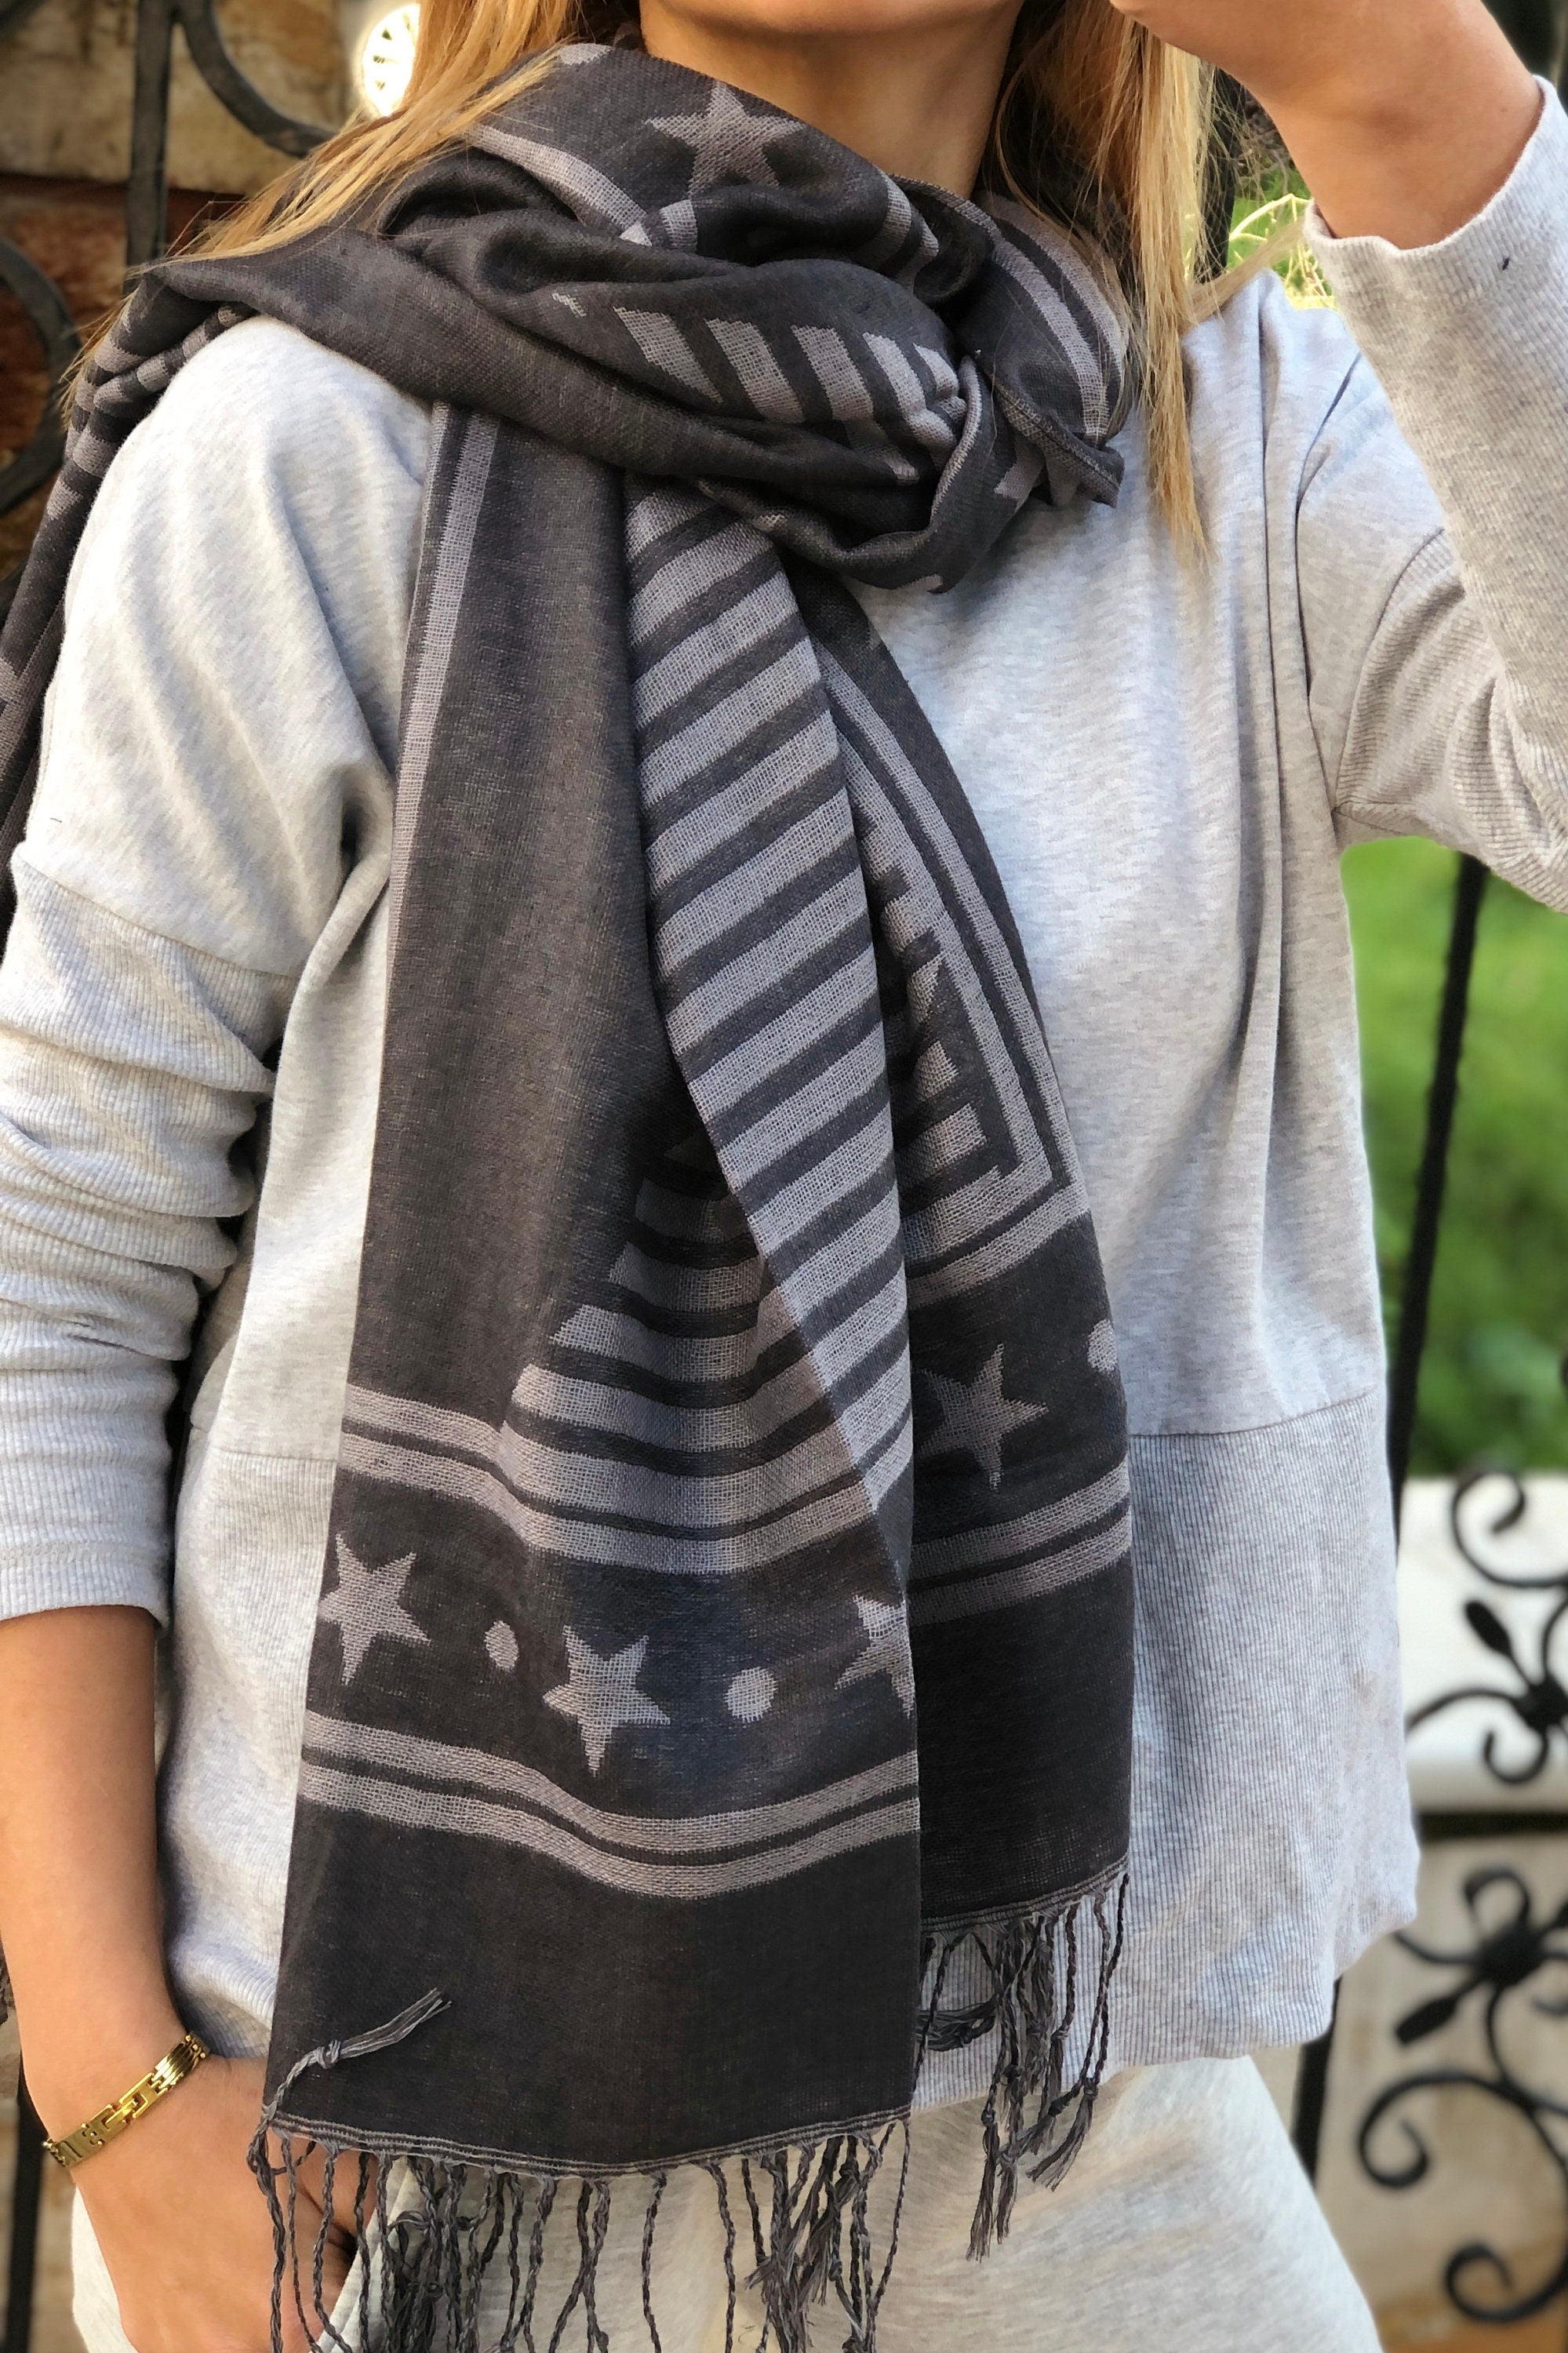 Stay stylish and warm this spring and autumn with this beautiful Rectangle Scarf featuring a unique geometric and star pattern.